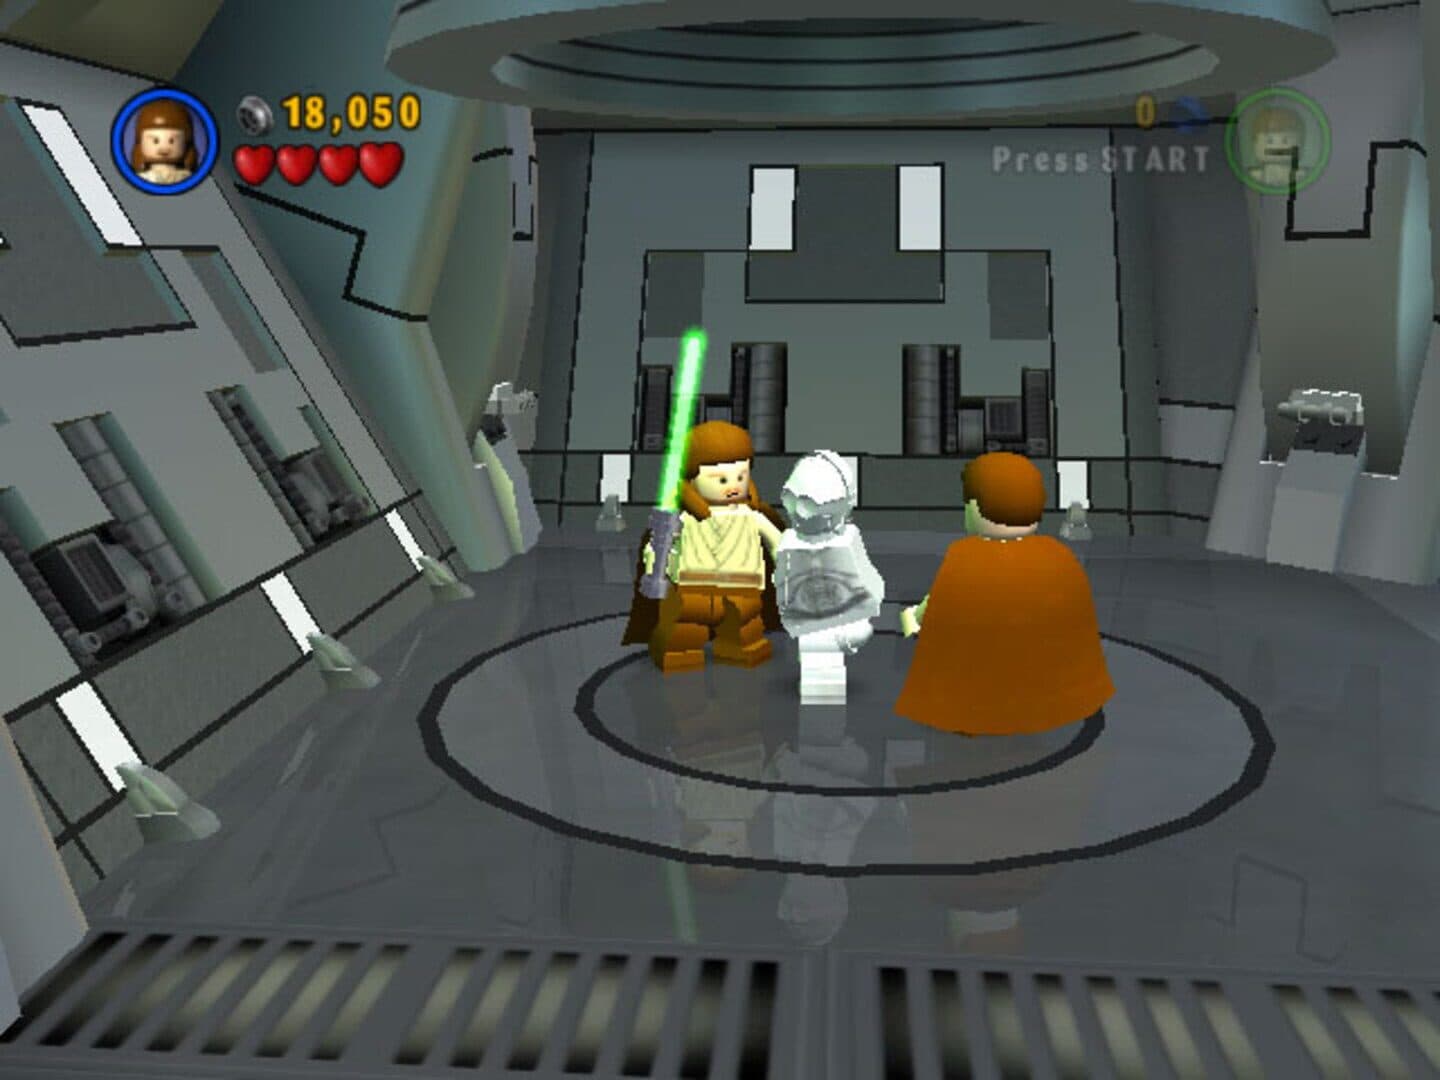 LEGO Star Wars: The Video Game Image